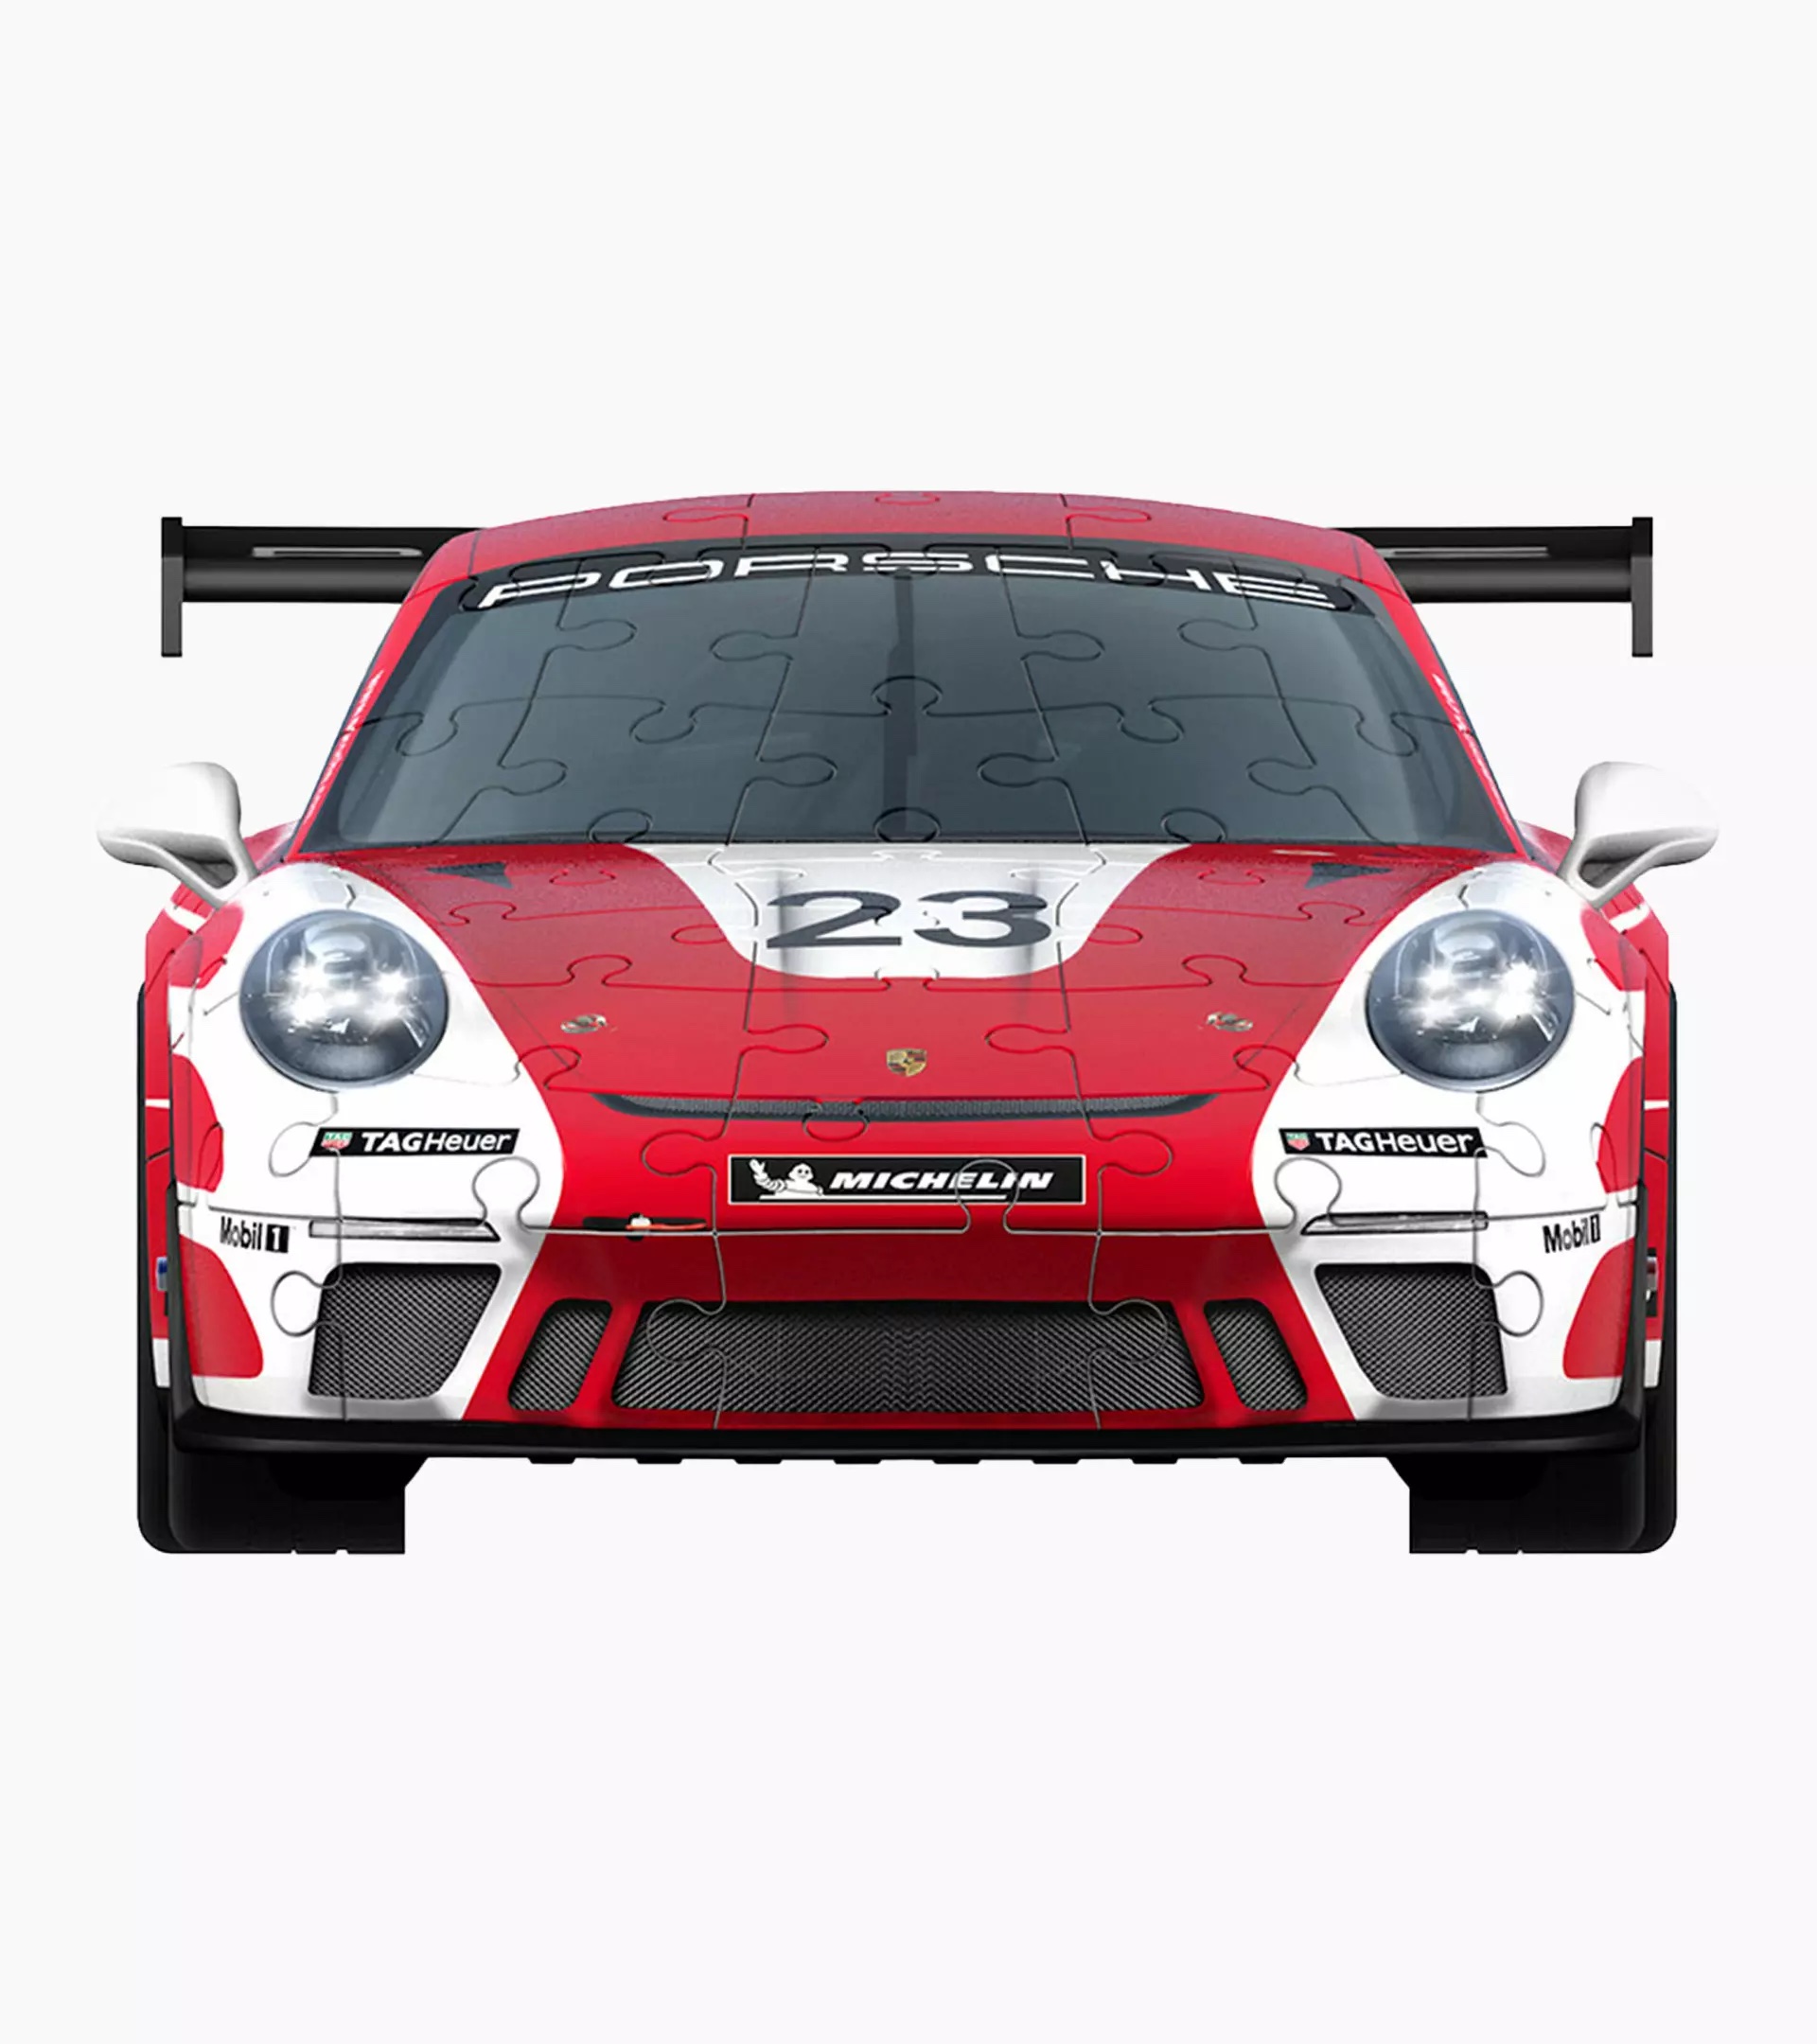 3D Puzzle, GT3 Cup Salzburg, red/white